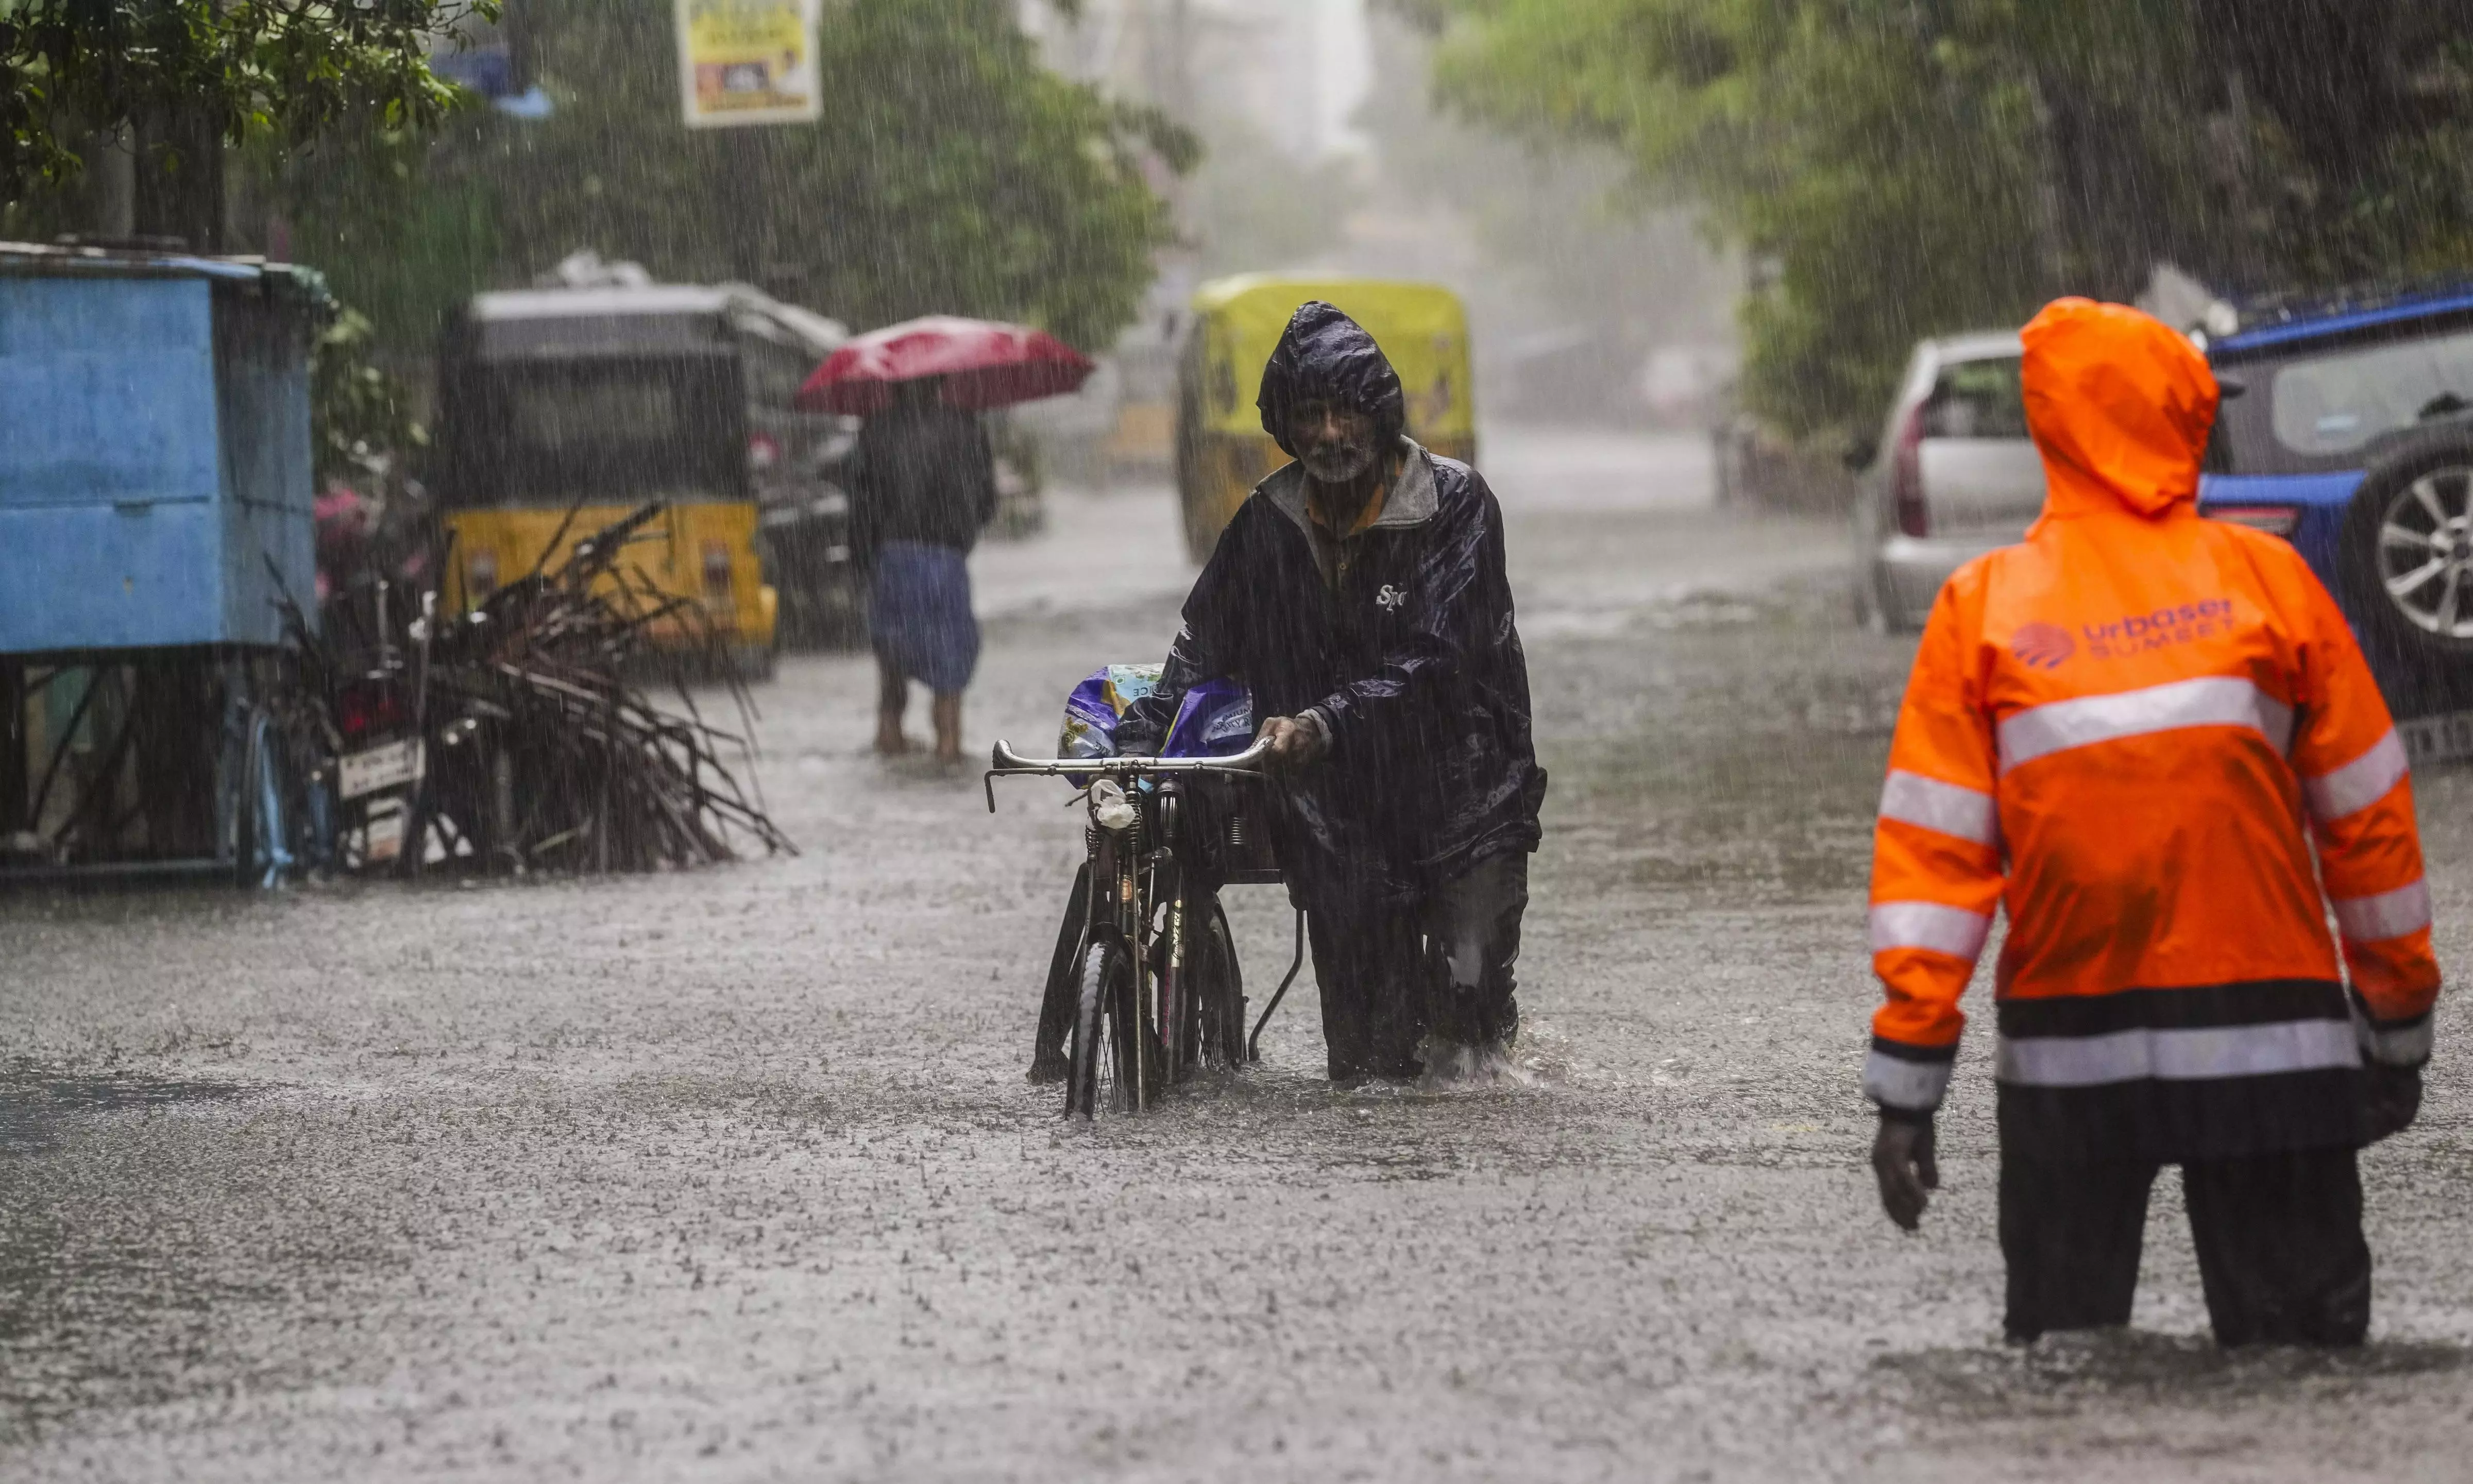 Cyclone effect: Heavy rain batters Chennai; flights diverted; holiday declared